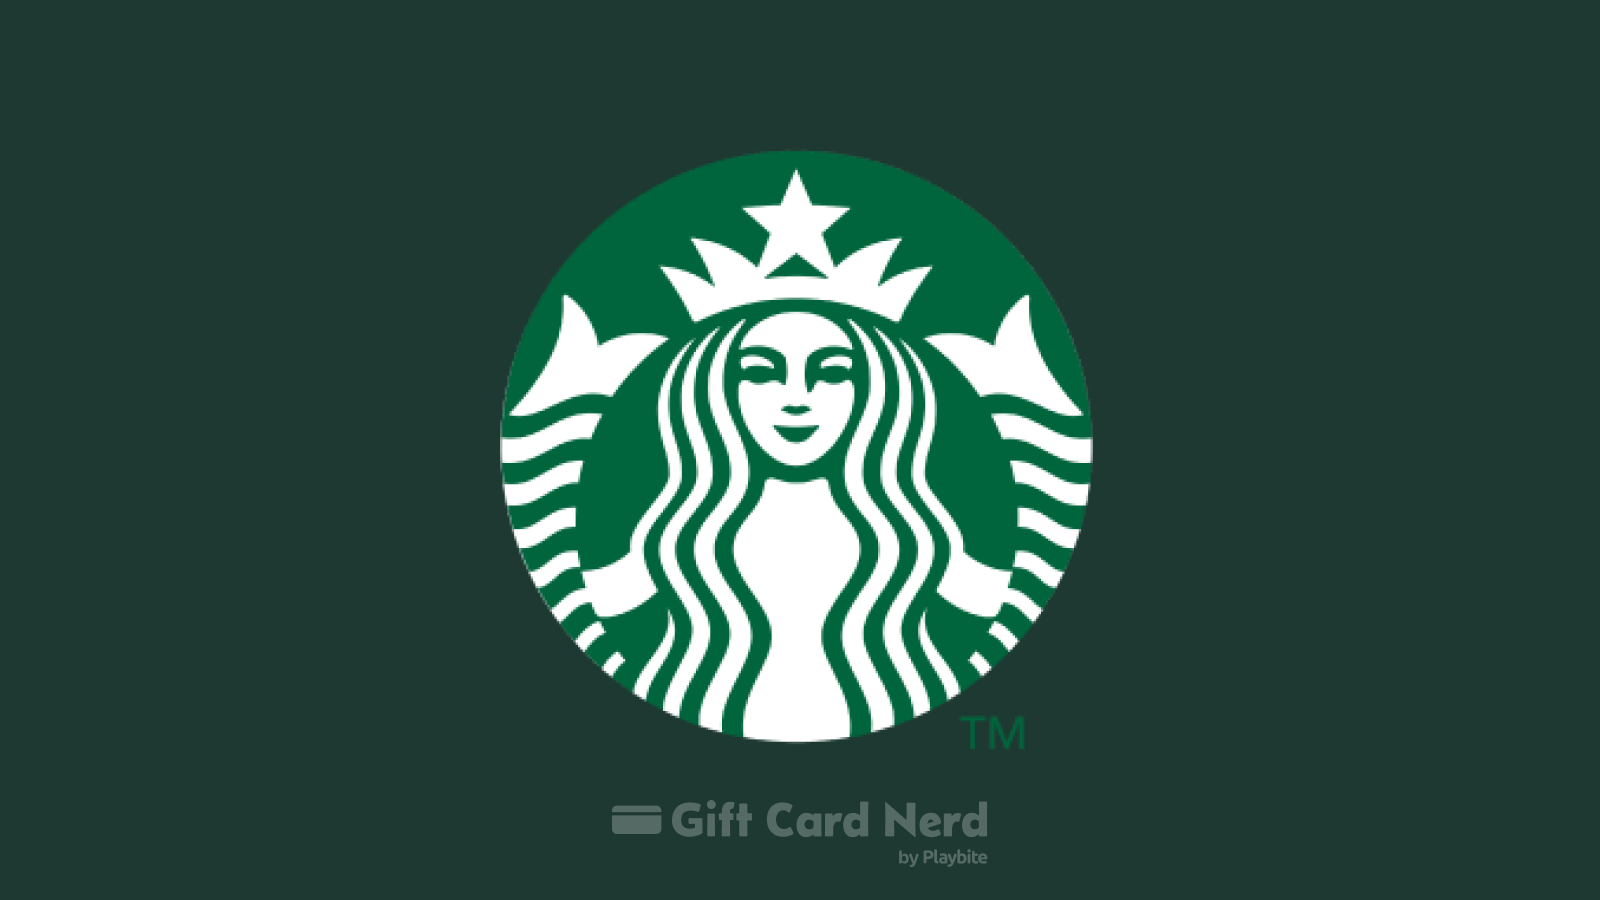 Does GameStop Sell Starbucks Gift Cards?